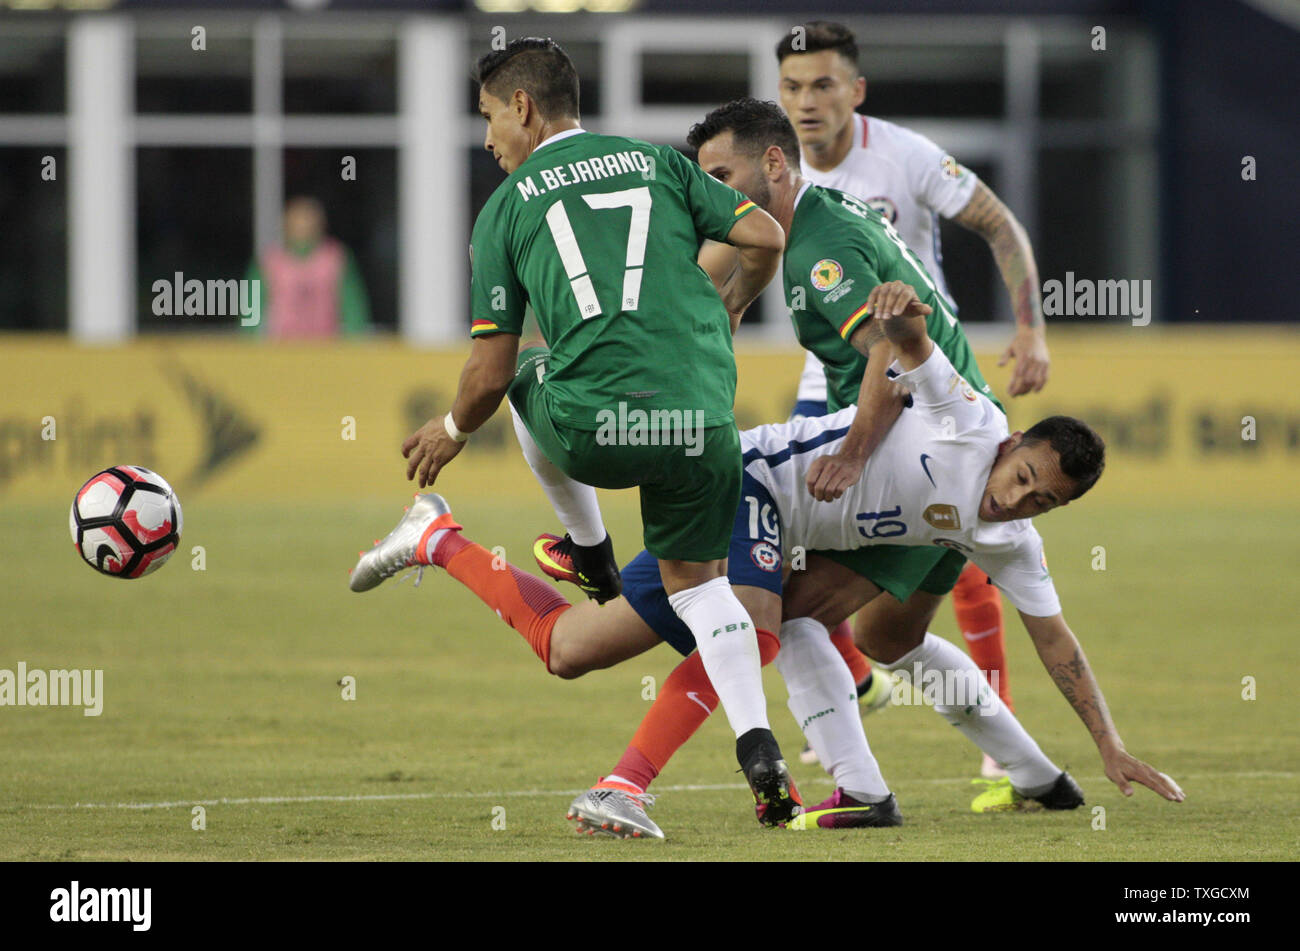 Chile forward Fabian Orellana (19) tangles with Bolivia forward Alejandro Melean (13) as Bolivia Mdefender Marvin Bejarno (17) chases after the ball in the second half of the Copa America Centenario Group D match at Gillette Stadium in Foxboro, Massachusetts on on June 10, 2016. Chile defeated Bolivia 2-1.  Photo by Matthew Healey/UPI Stock Photo